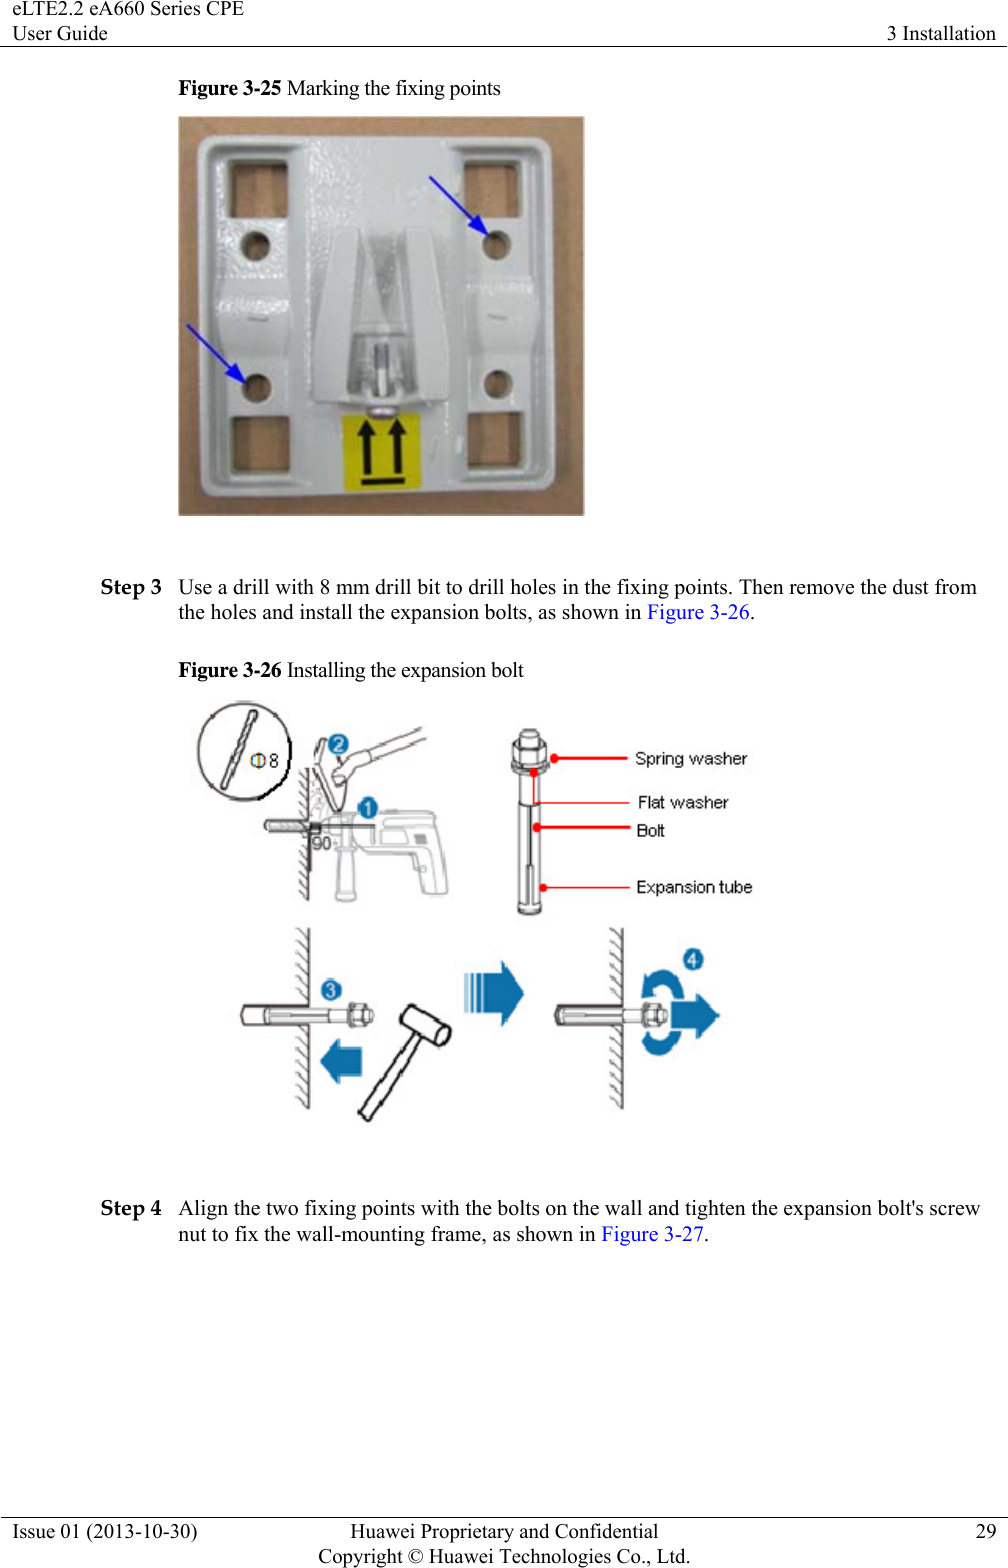 eLTE2.2 eA660 Series CPE User Guide  3 Installation Issue 01 (2013-10-30)  Huawei Proprietary and Confidential         Copyright © Huawei Technologies Co., Ltd.29 Figure 3-25 Marking the fixing points   Step 3 Use a drill with 8 mm drill bit to drill holes in the fixing points. Then remove the dust from the holes and install the expansion bolts, as shown in Figure 3-26. Figure 3-26 Installing the expansion bolt   Step 4 Align the two fixing points with the bolts on the wall and tighten the expansion bolt&apos;s screw nut to fix the wall-mounting frame, as shown in Figure 3-27. 